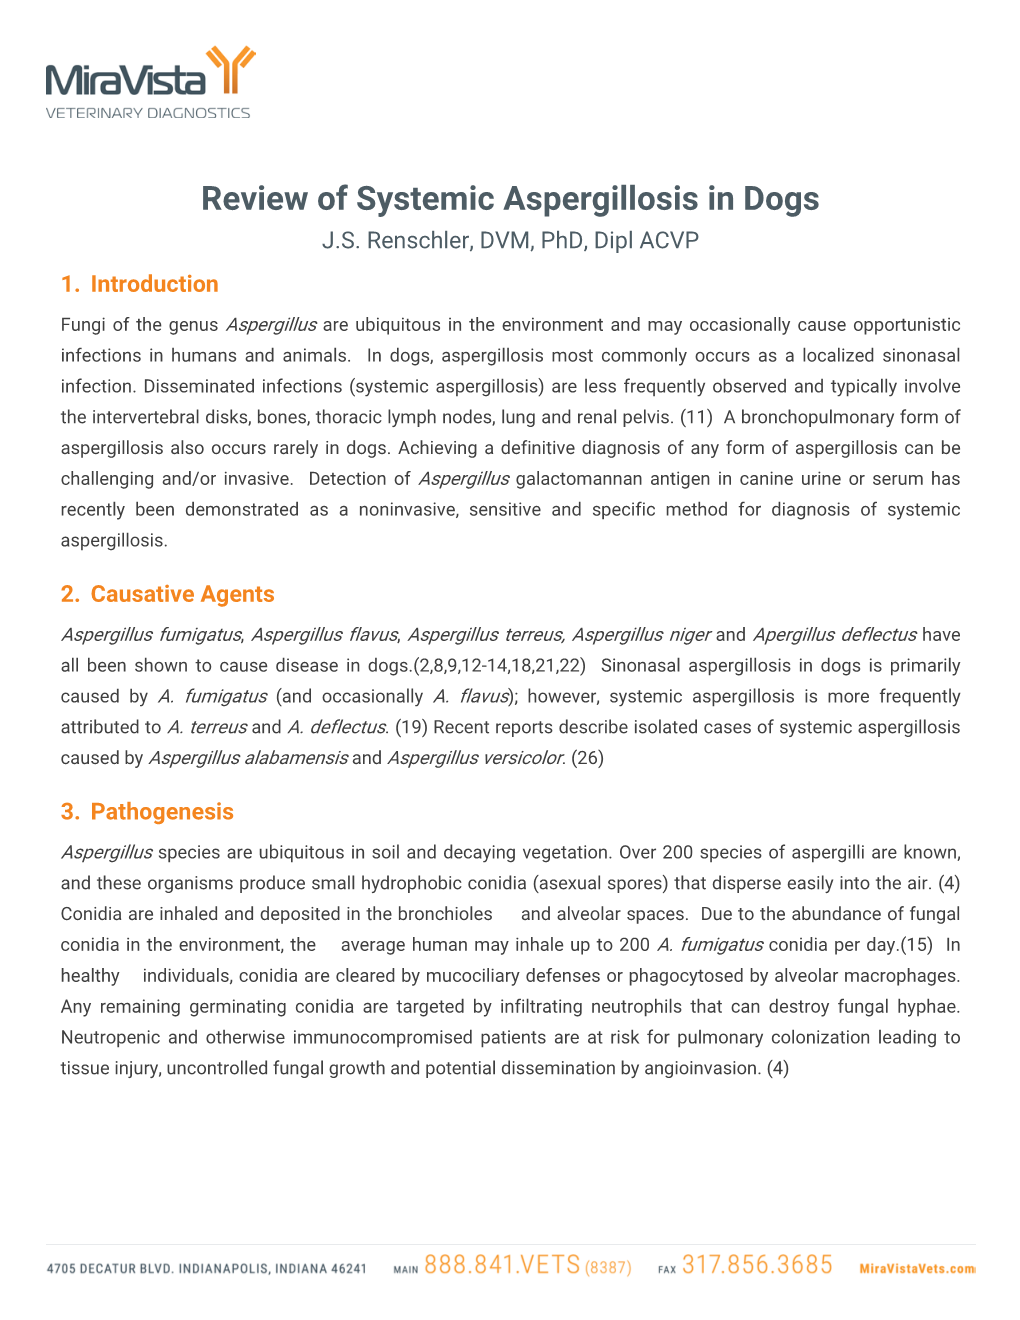 Review of Systemic Aspergillosis in Dogs J.S